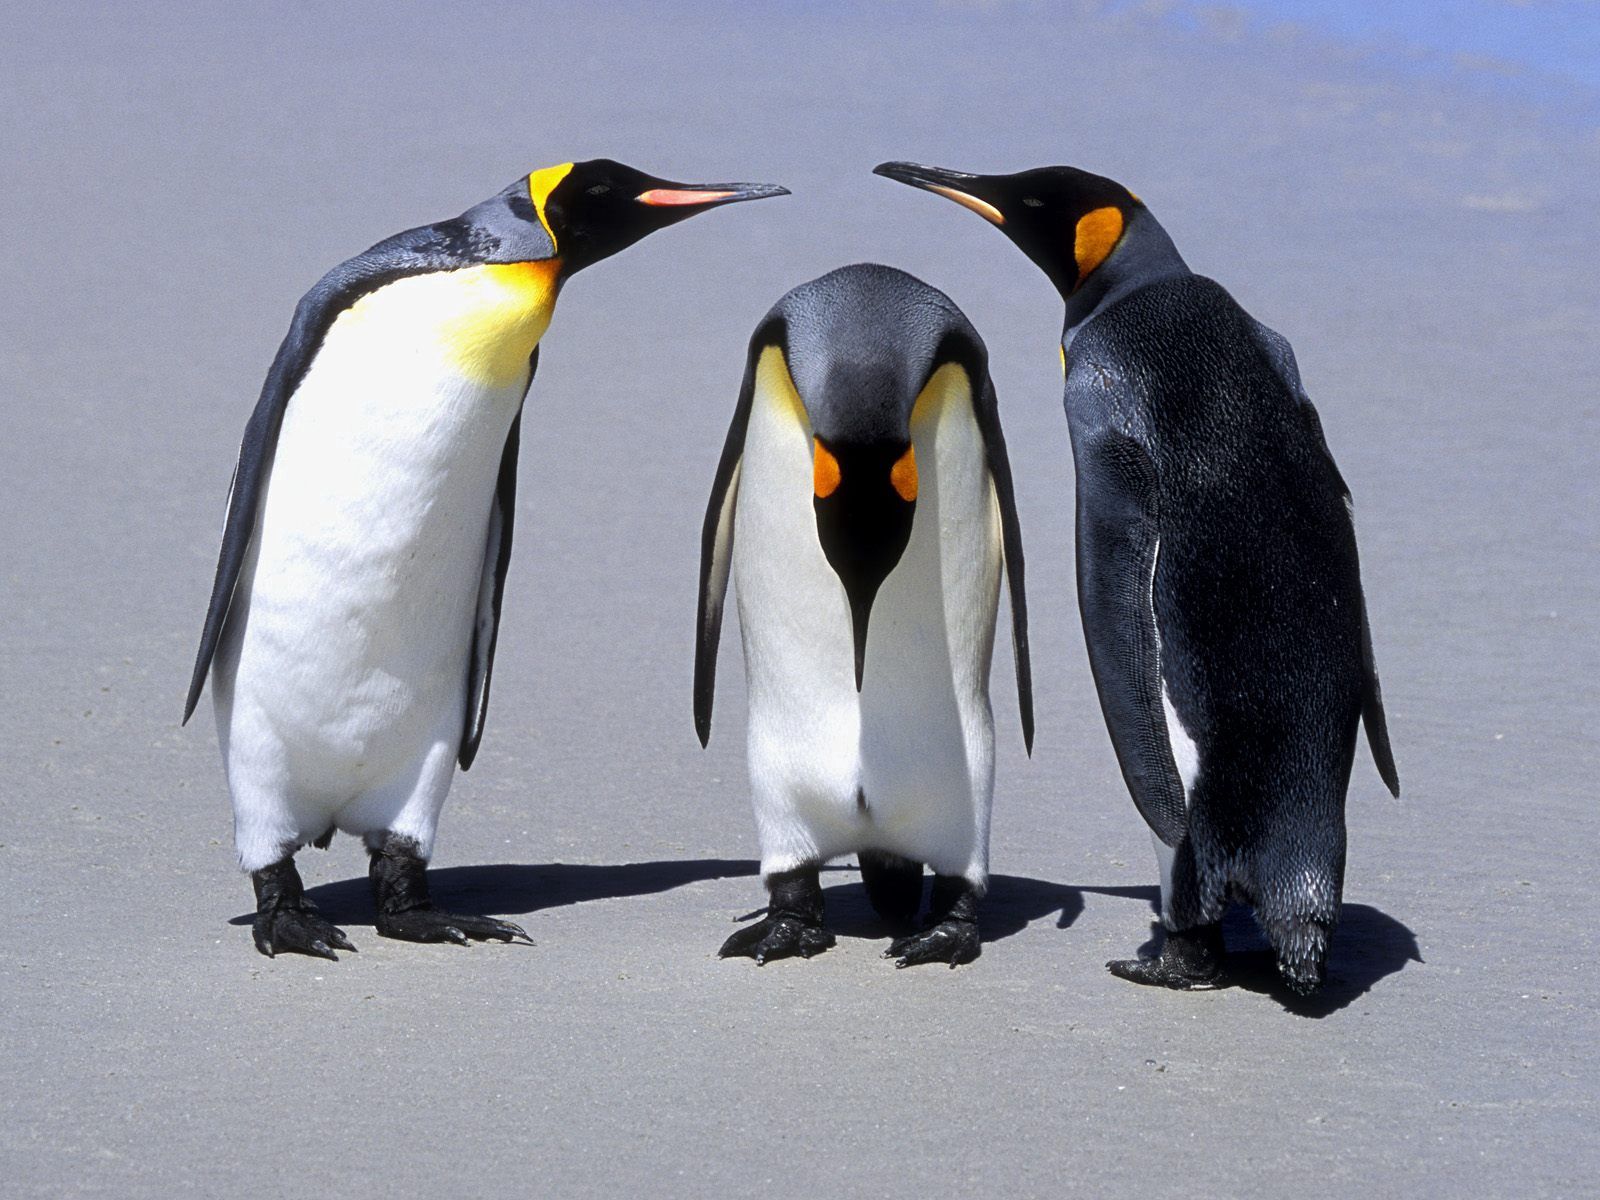 Download wallpaper 1600x1200 penguins, three, communication, shadow hd  background